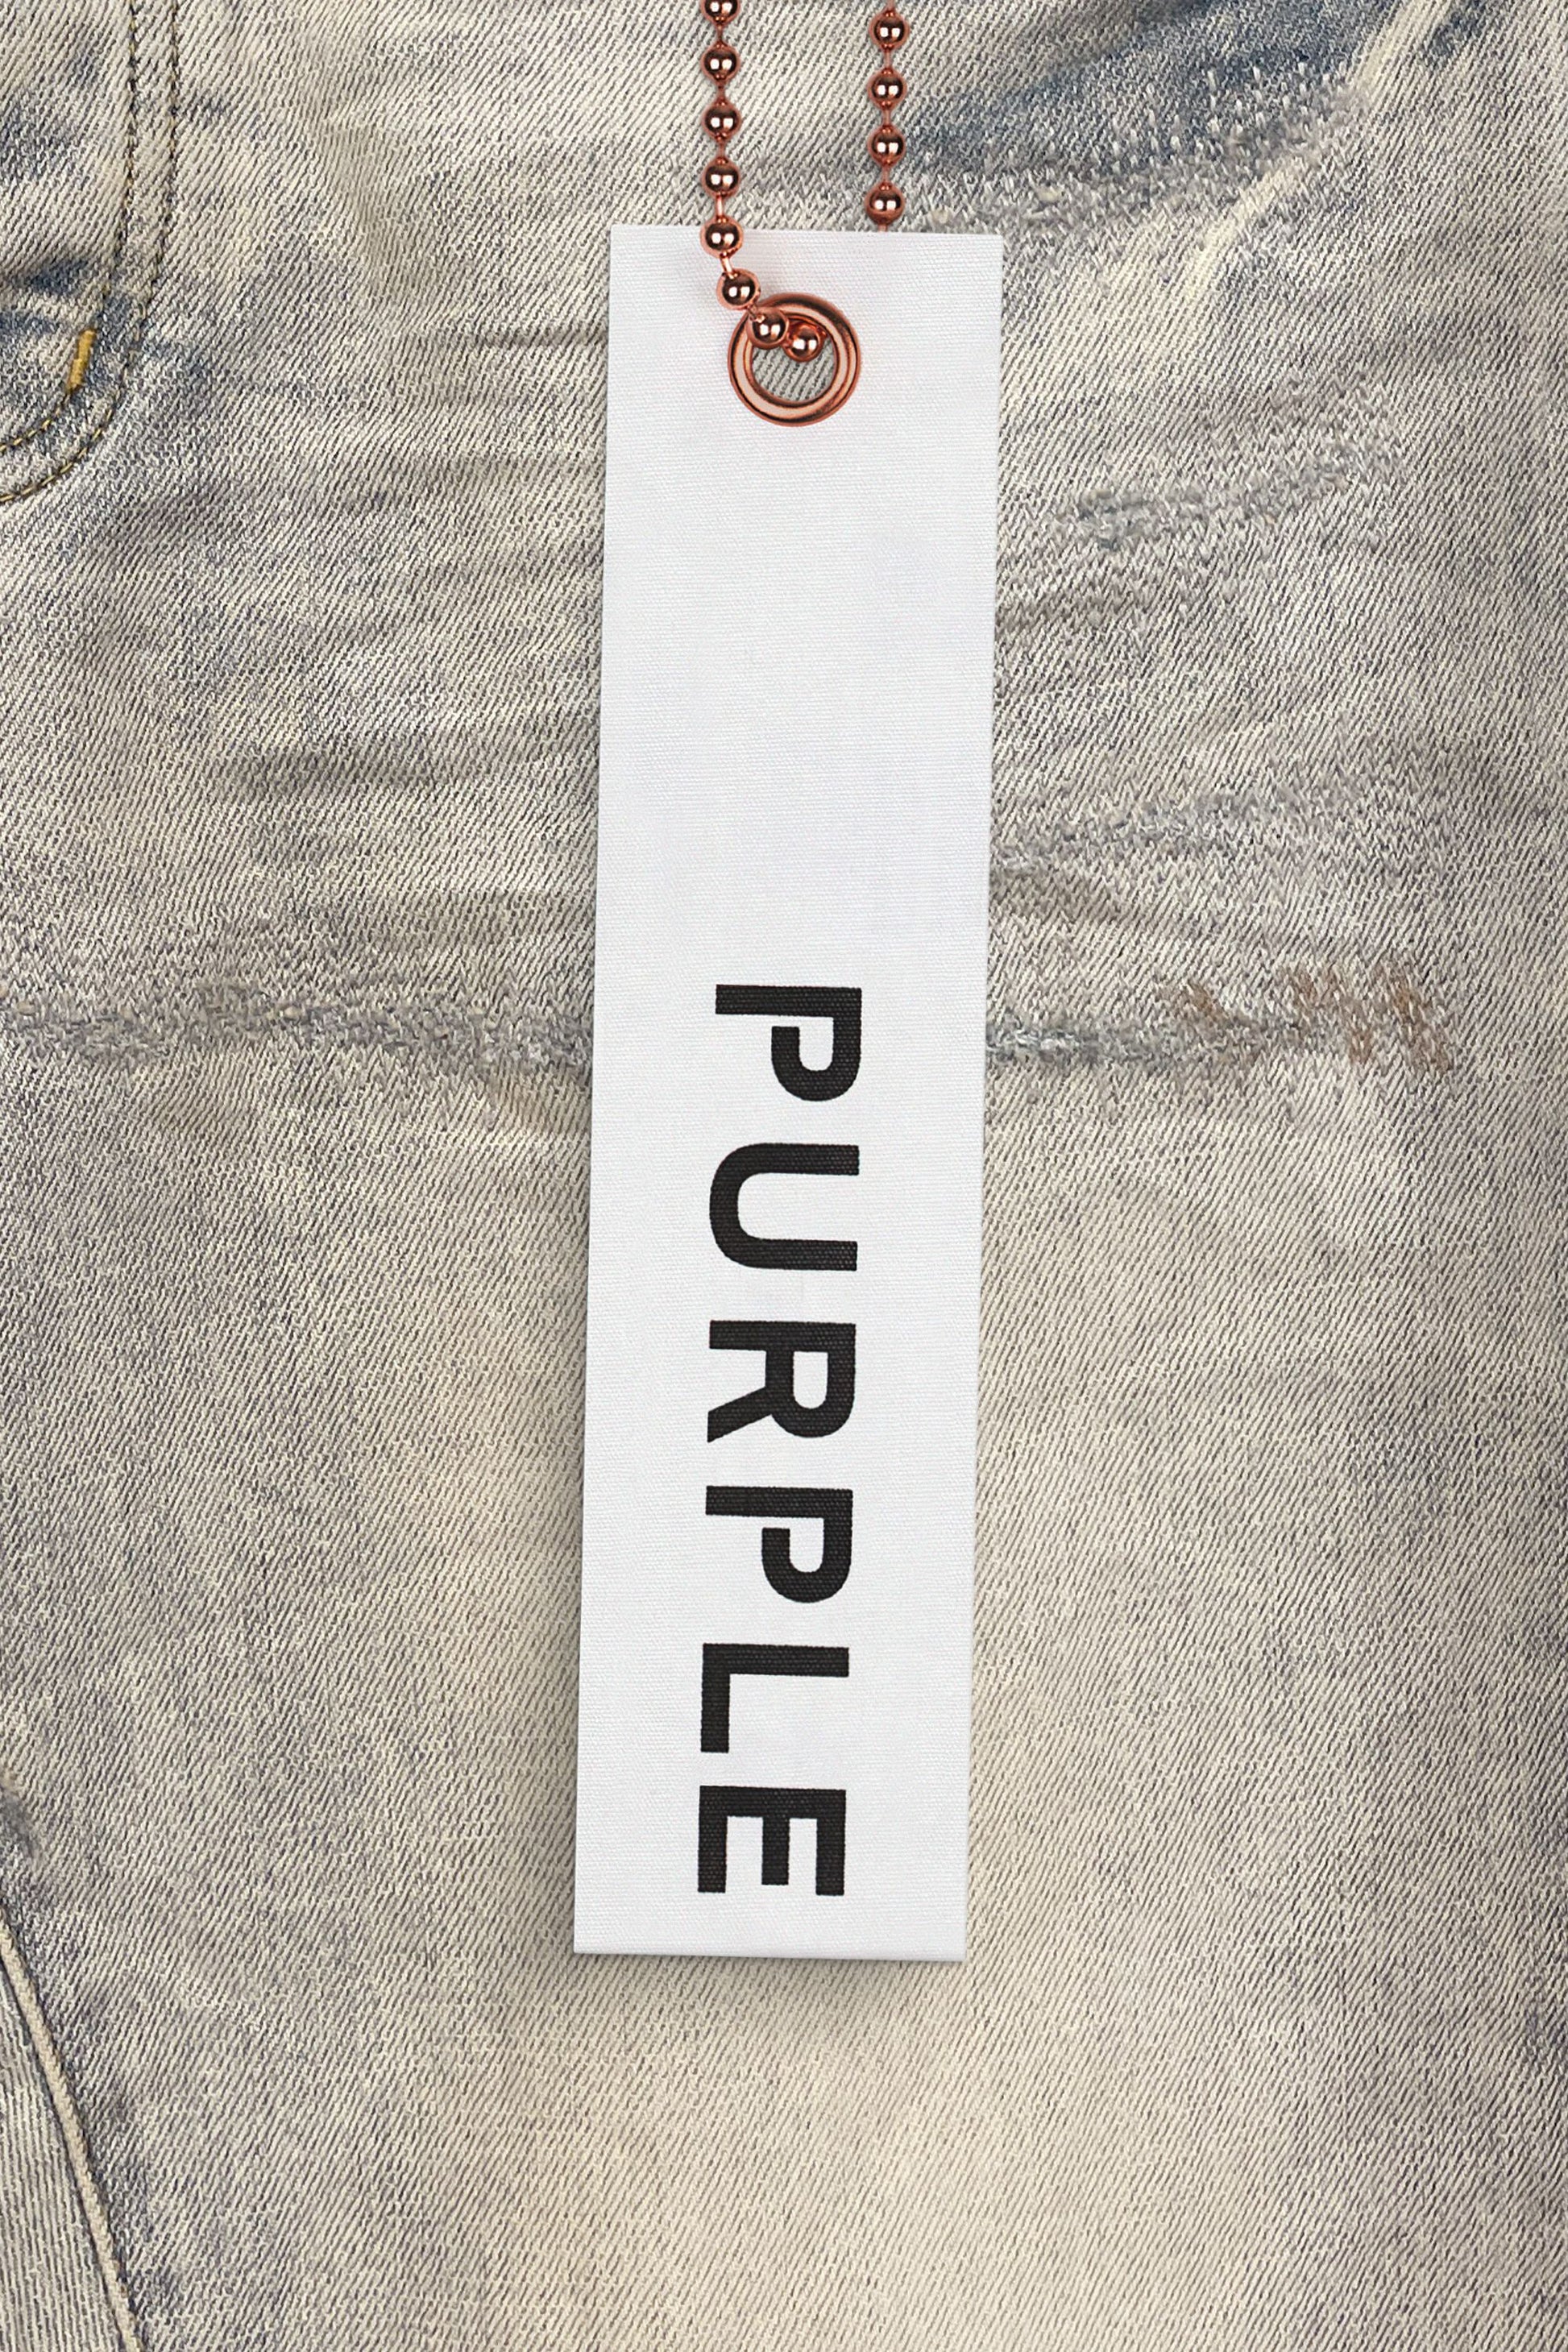 Purple denim P001 review. Do you have your pair yet??? Sale link